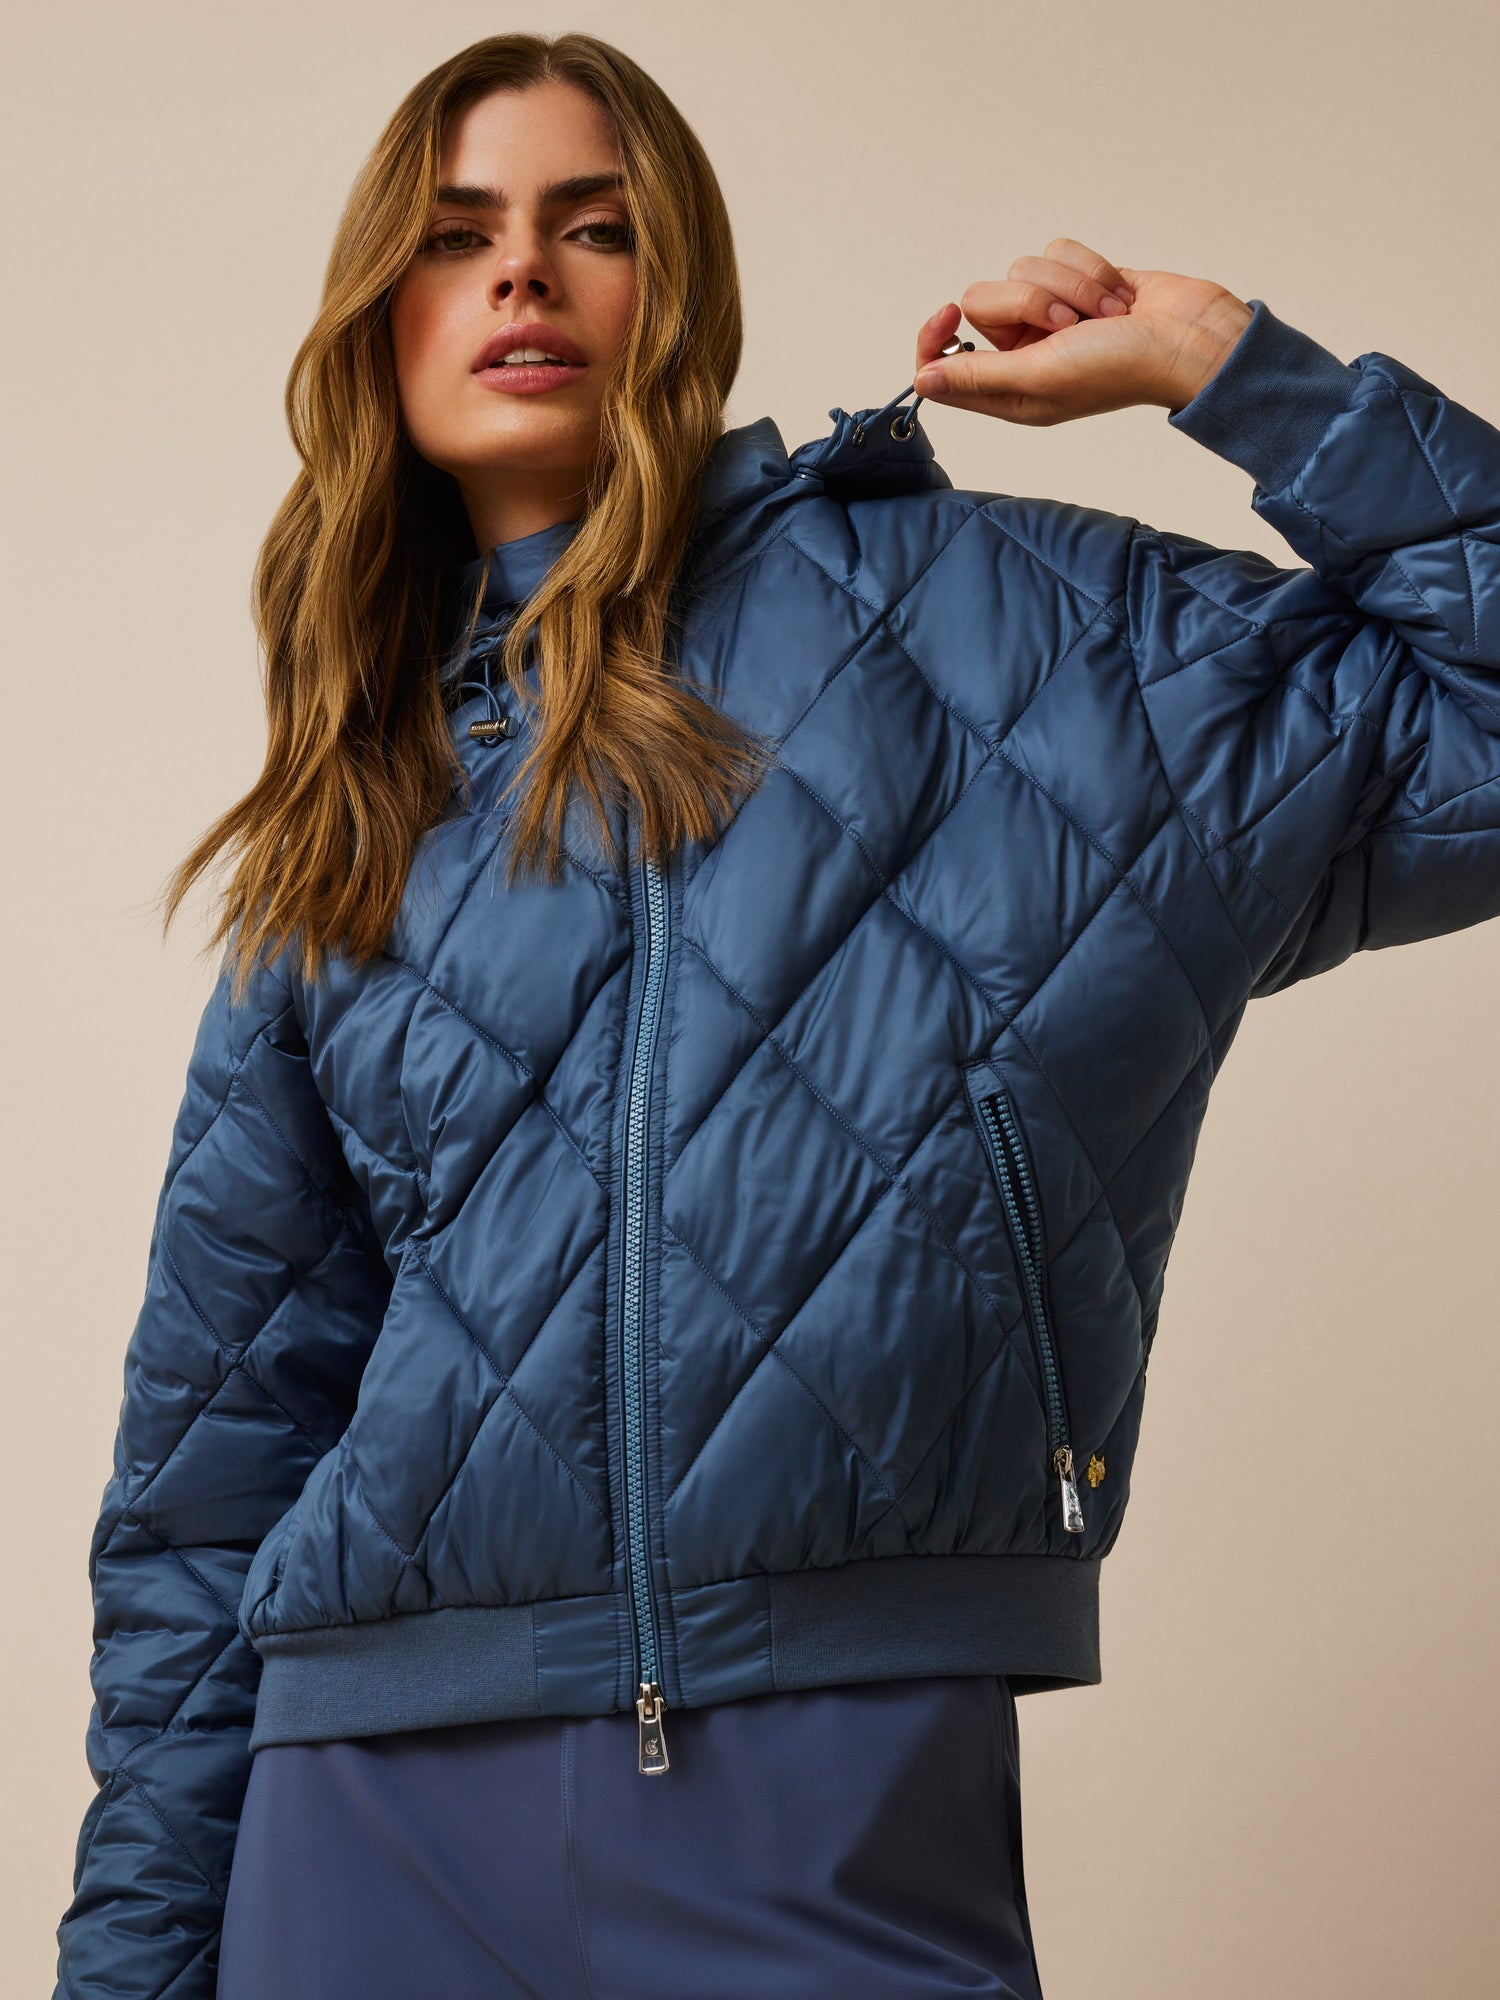 Women's Outerwear & Layers